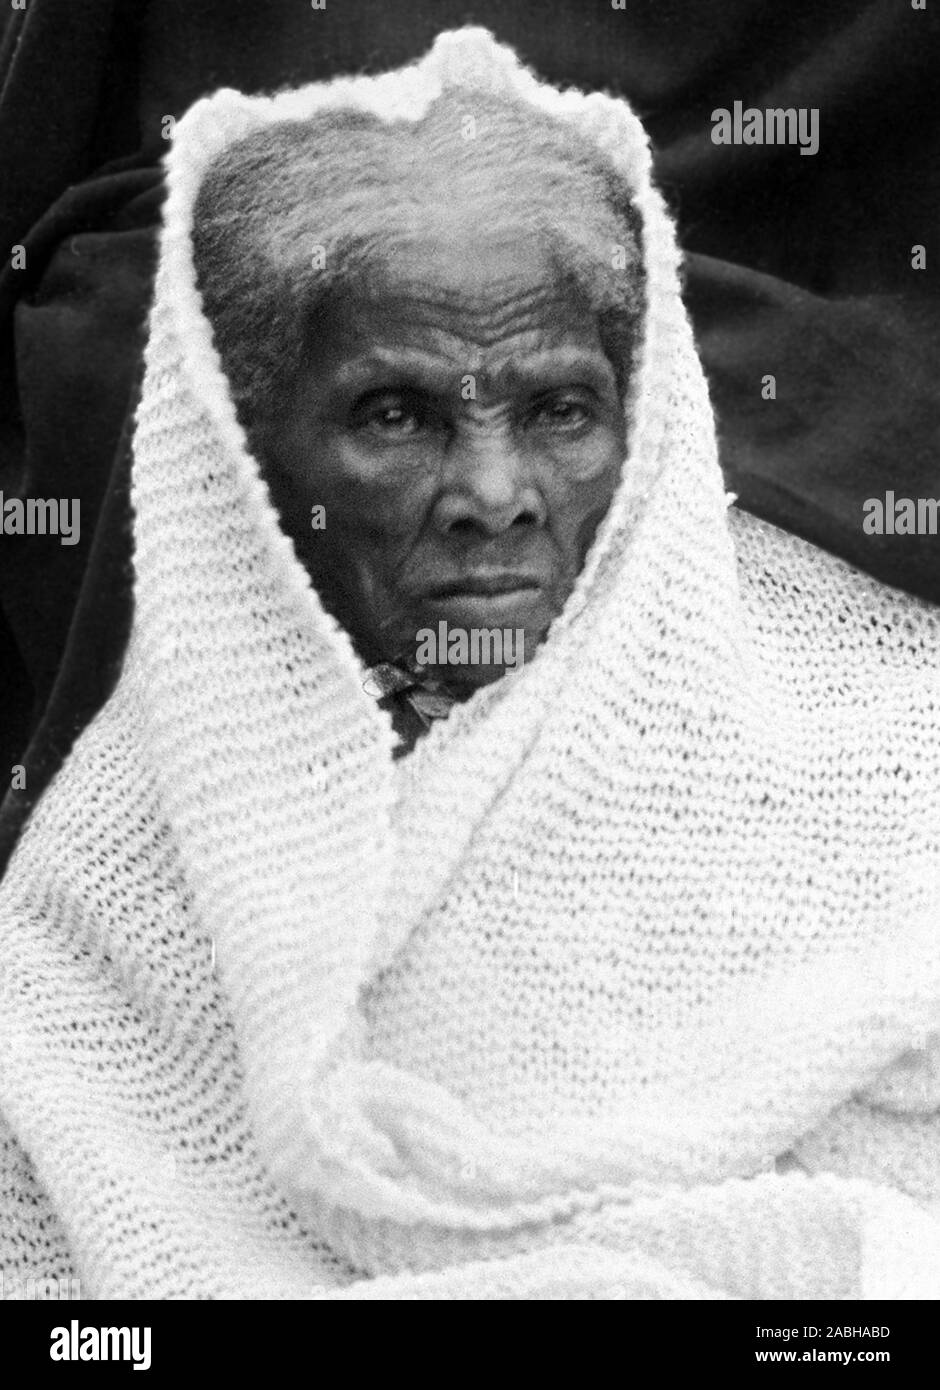 Vintage Portrait Photo Of Harriet Tubman C10 1913 Born Into Slavery Tubman Birth Name Araminta Ross Escaped And Later Guided Other Slaves To Freedom Via The Underground Railroad Before Working As